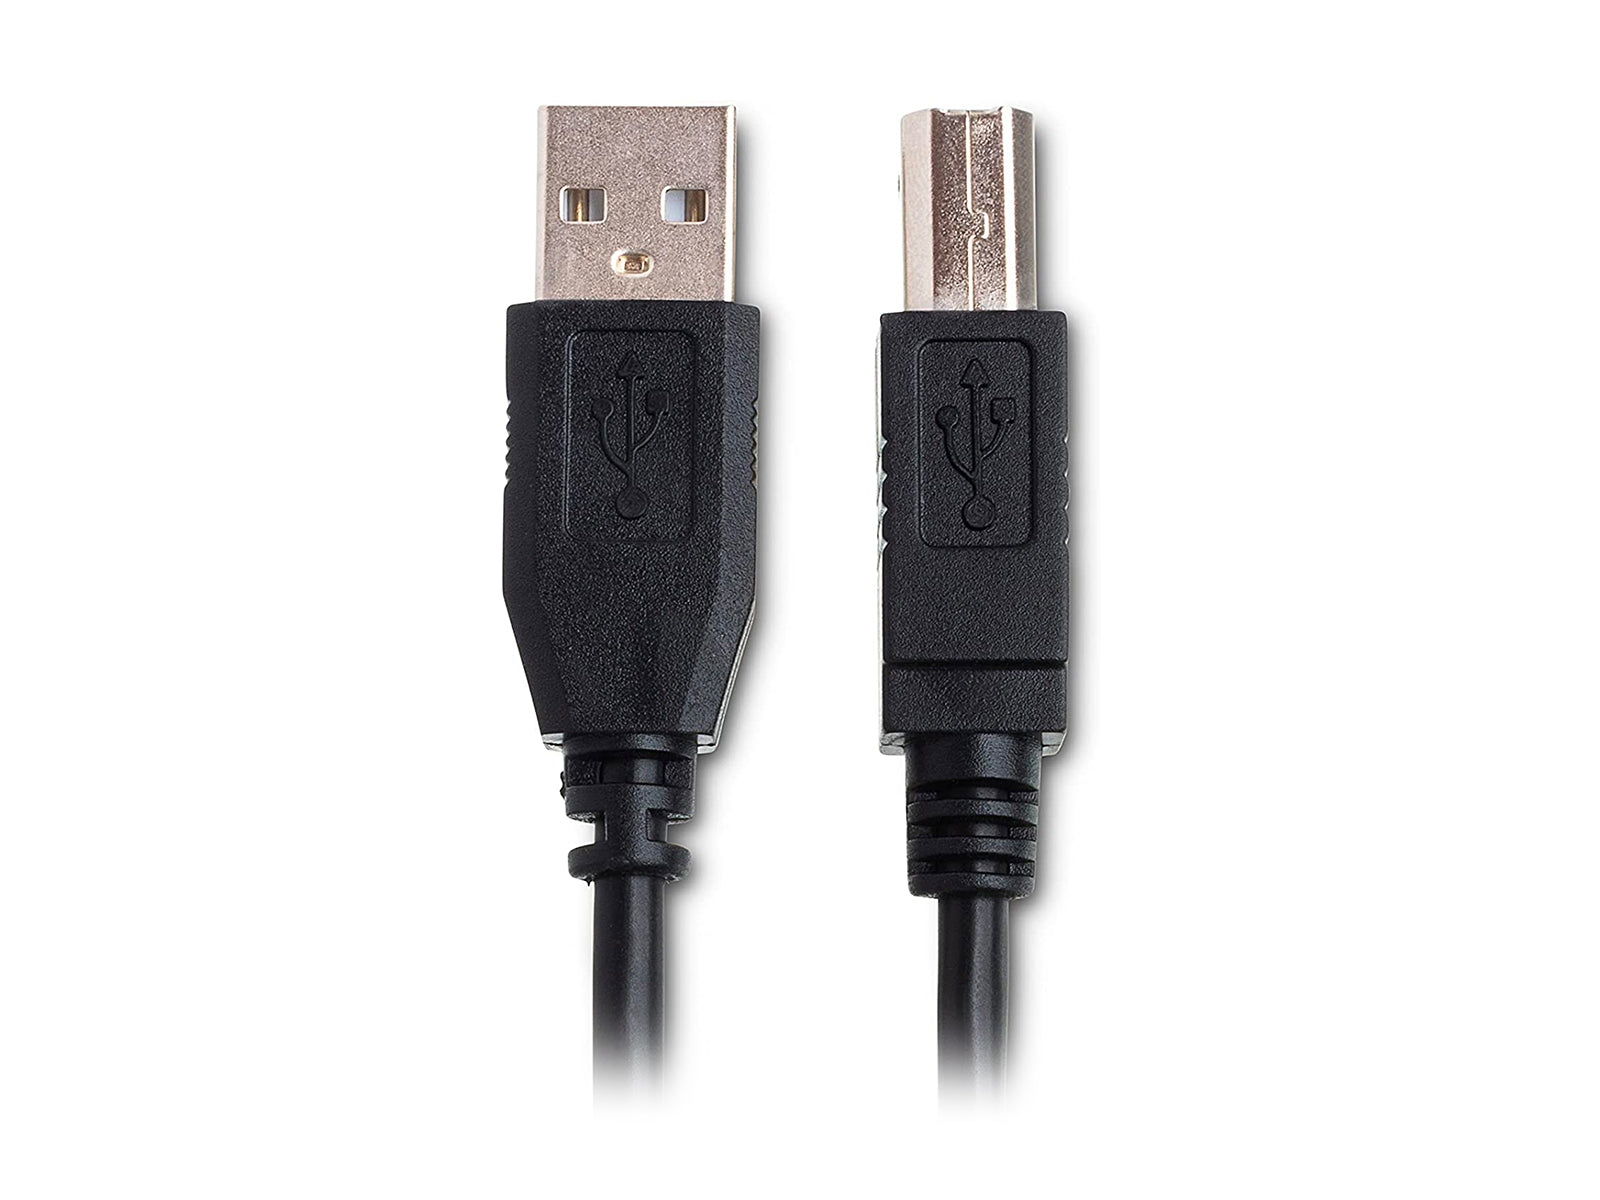 USB Type-A to USB Type-B Video Signal Cable 6ft (39917) Monitors.com 